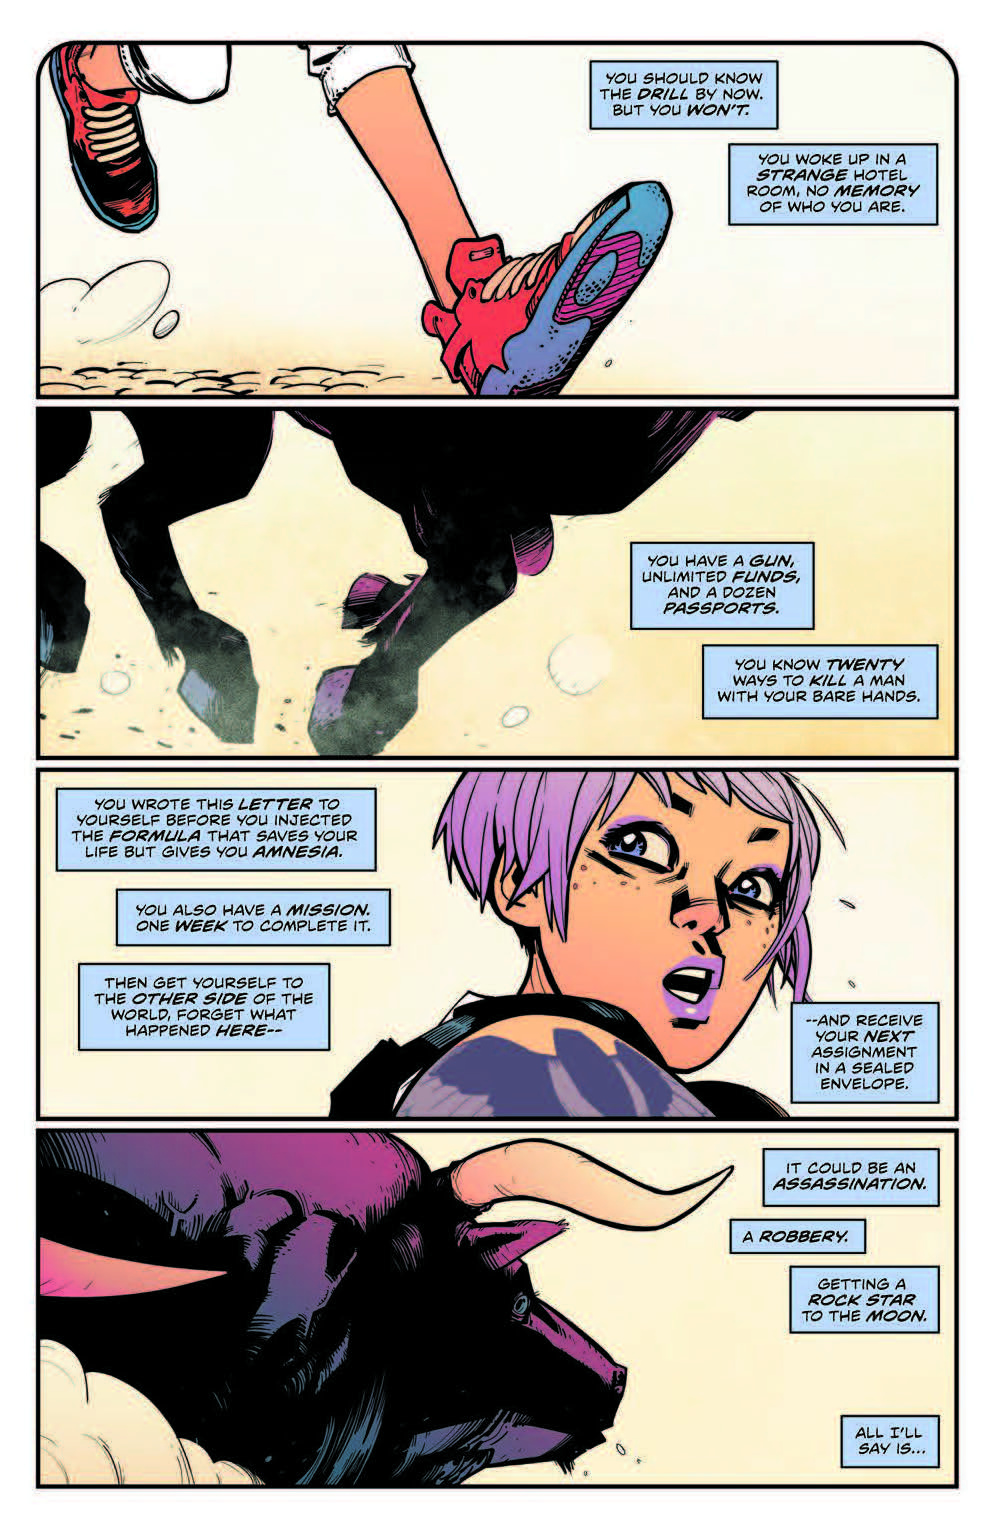 Eve-Stranger-2-preview-page-2